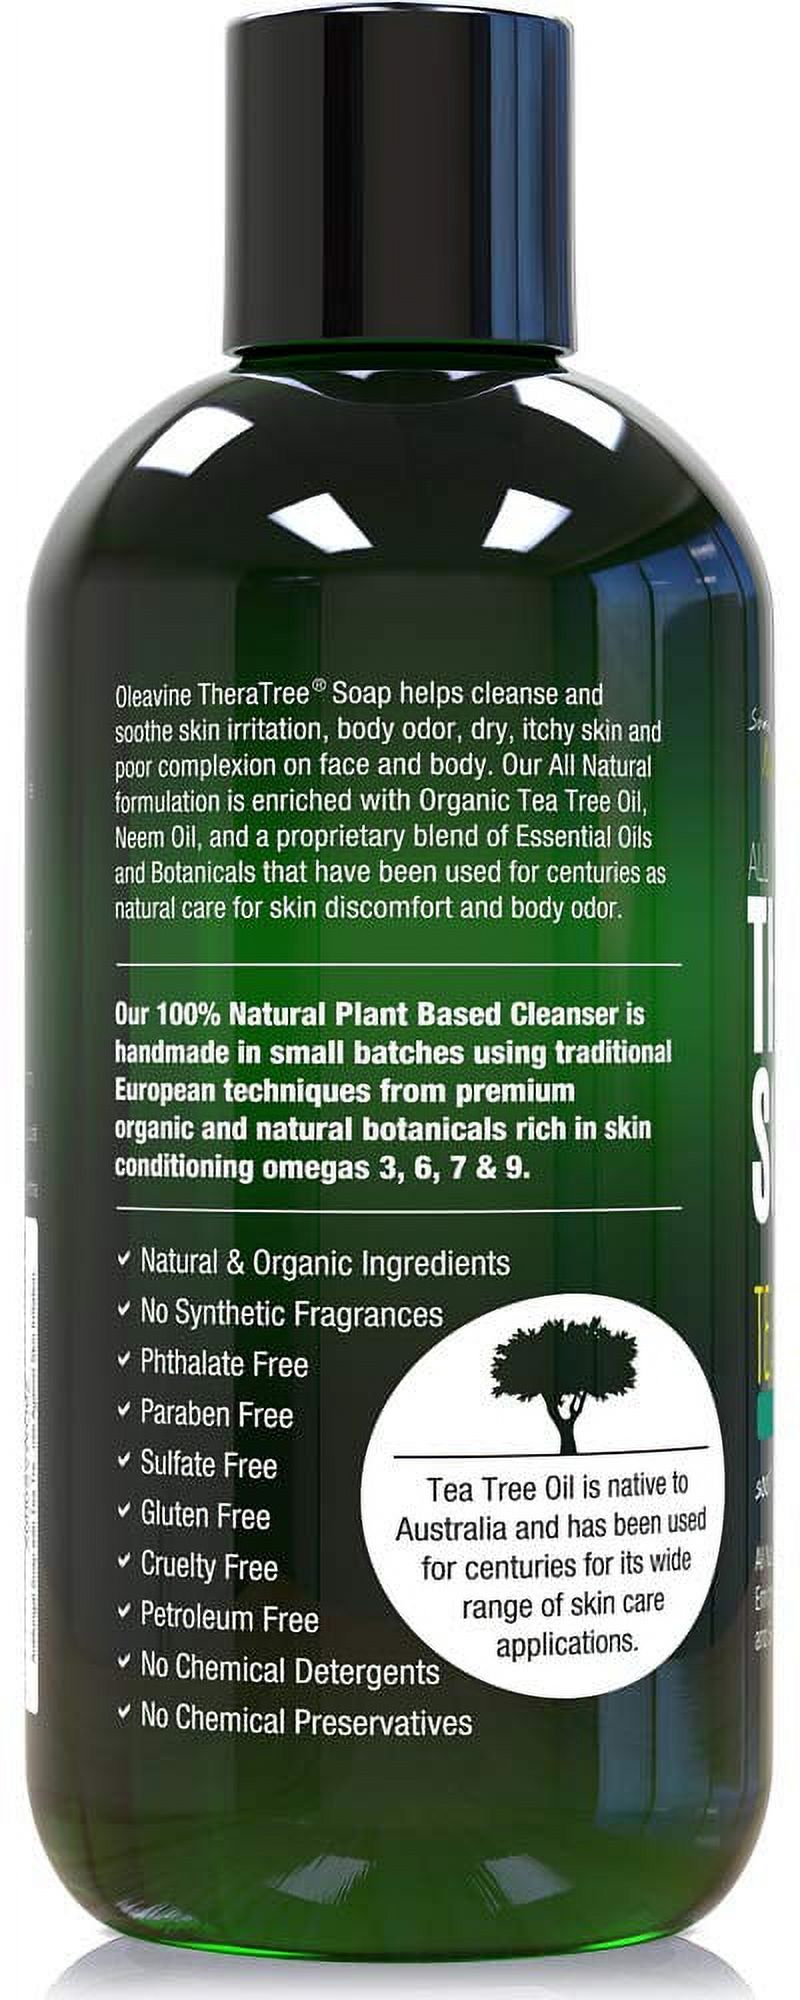 Oleavine TheraTree Tea Tree Oil Soap with Neem Oil - 12oz - Helps Skin Irritation, Body Odor, & Helps Restore Healthy Complexion for Body and Face TheraTree - image 5 of 5